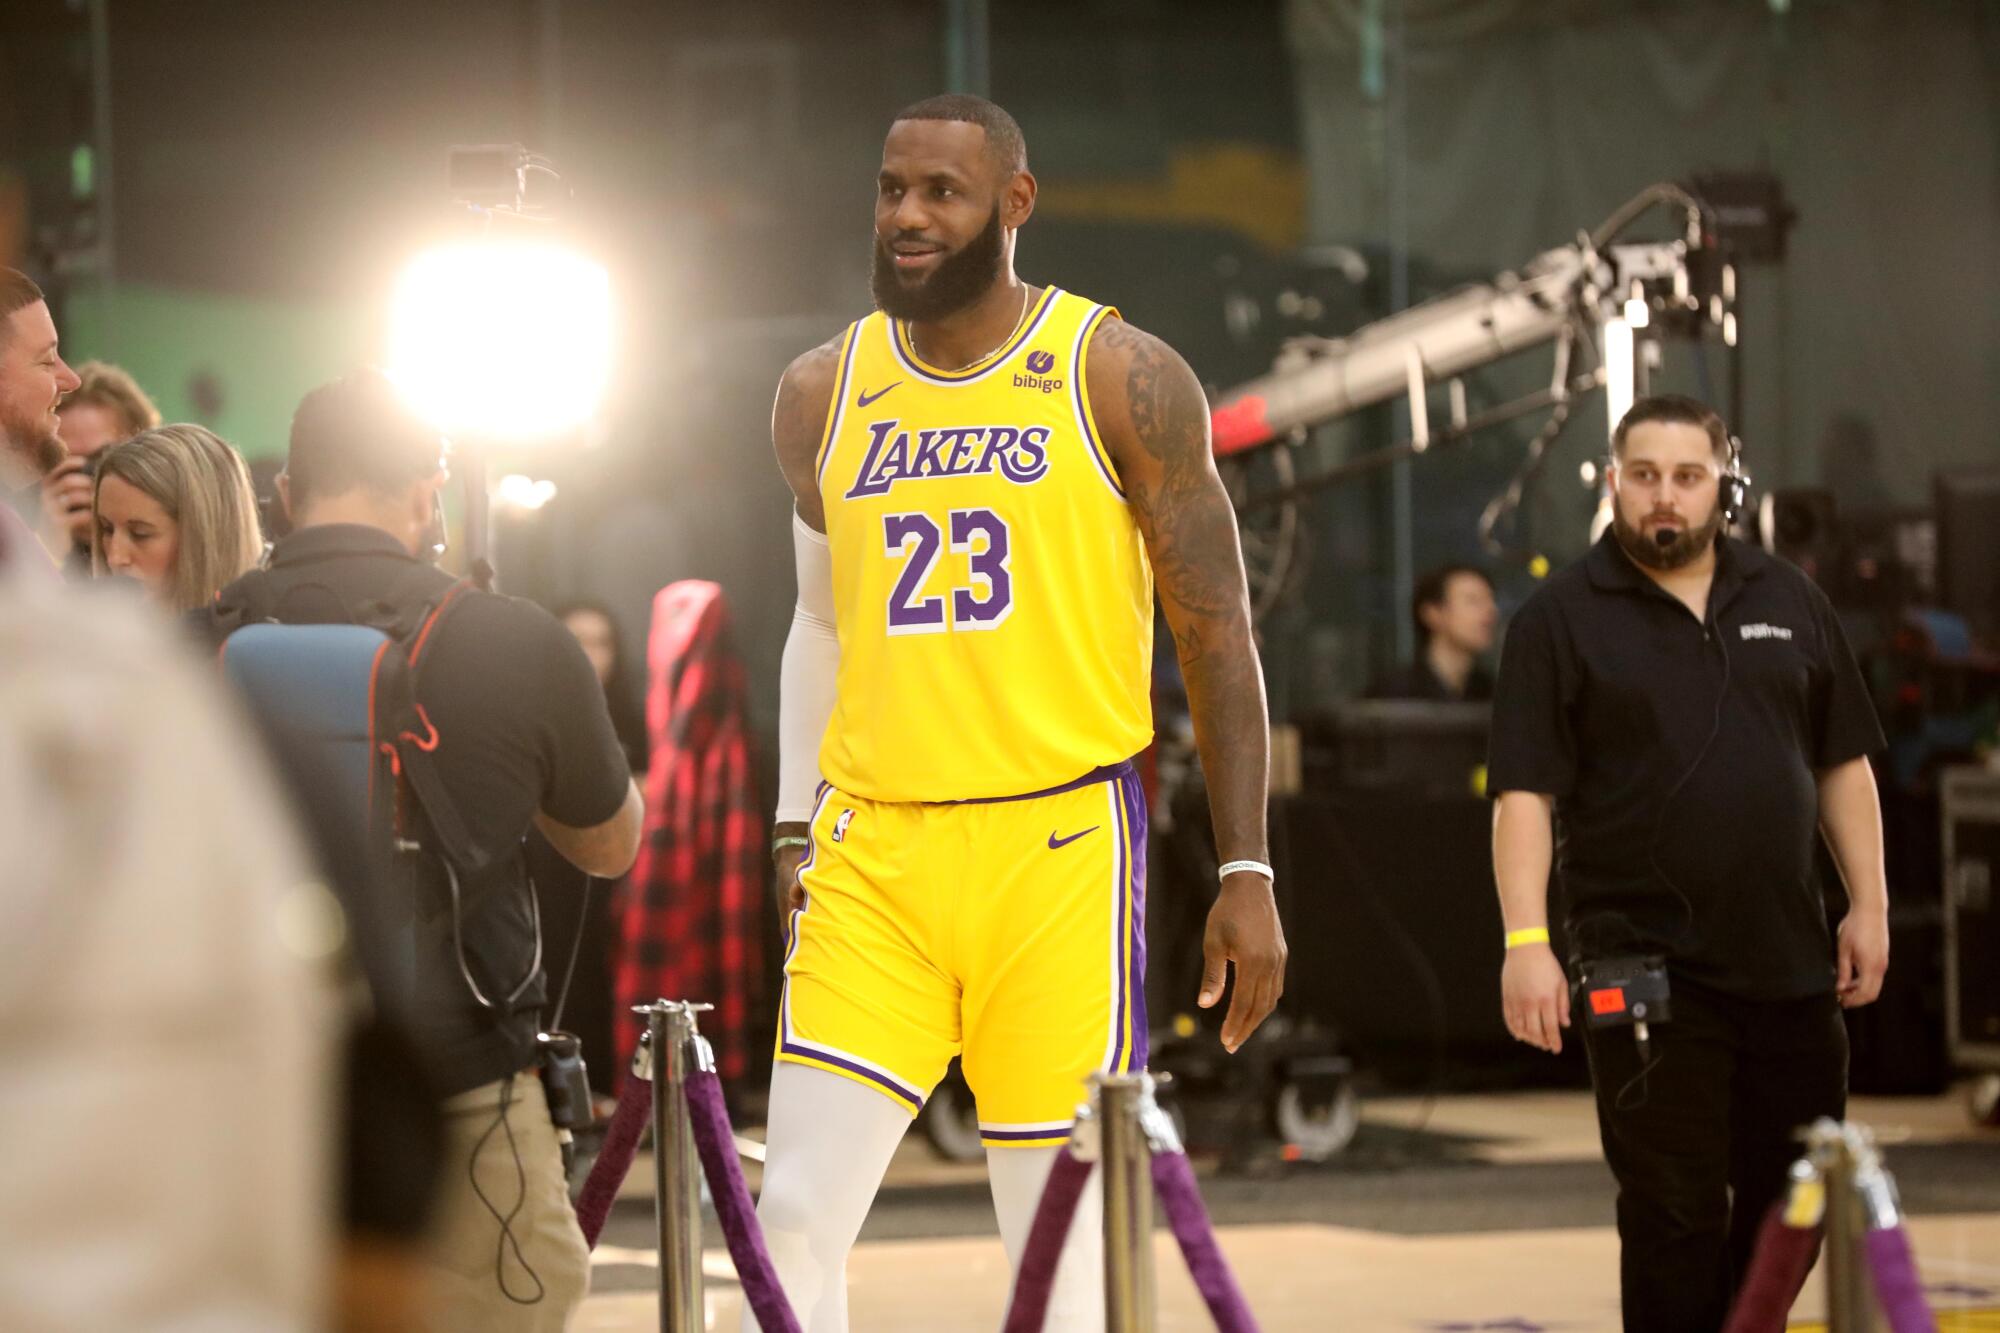 Lakers star LeBron James heads to center stage at media day in El Segundo.